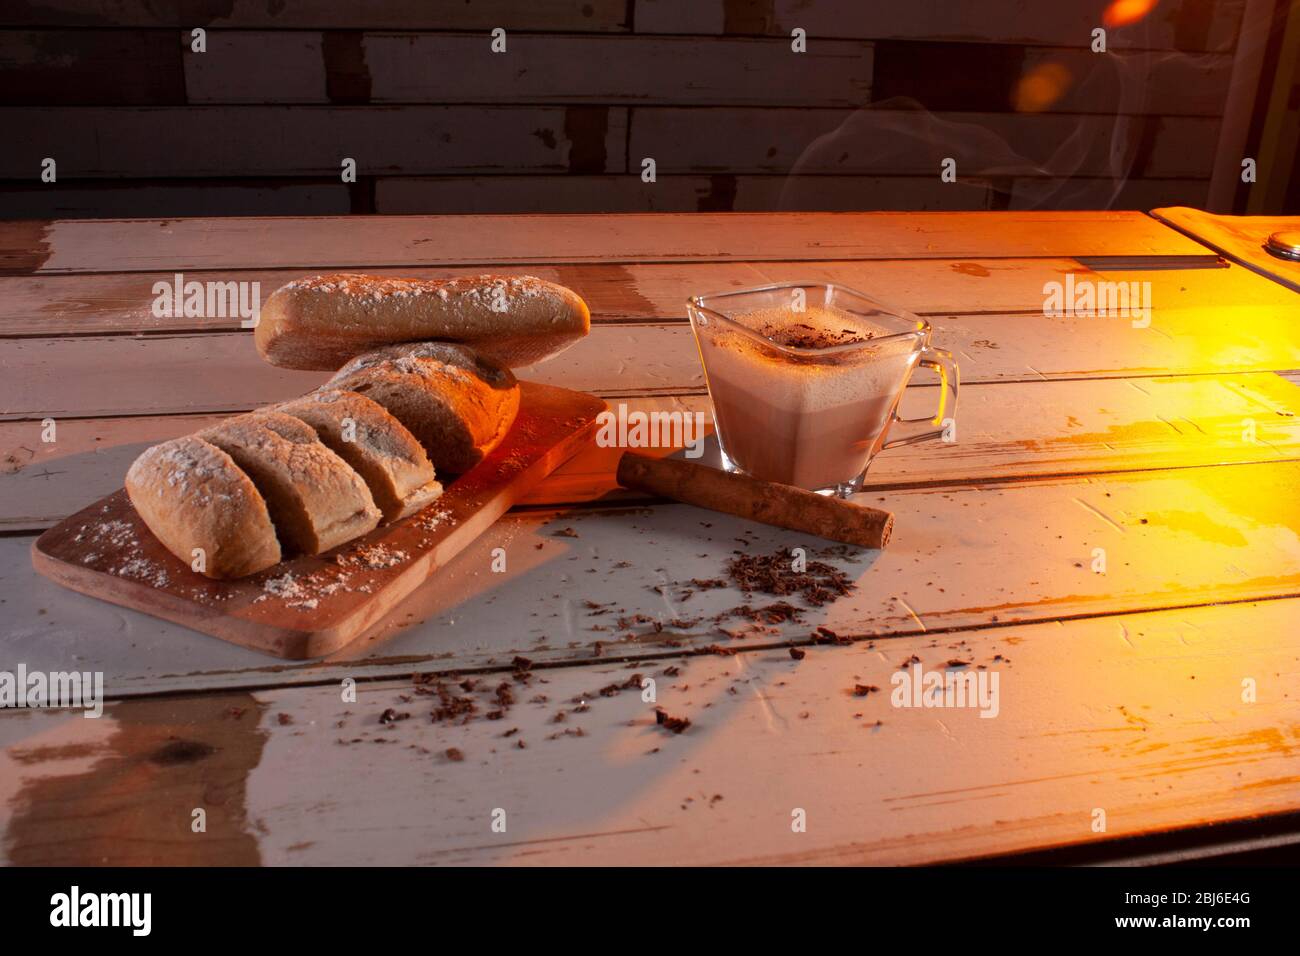 Chocolate in Mexico is one of the most exquisite pleasures, nothing richer than hot chocolate in the morning, cinnamon will give you a special touch i Stock Photo